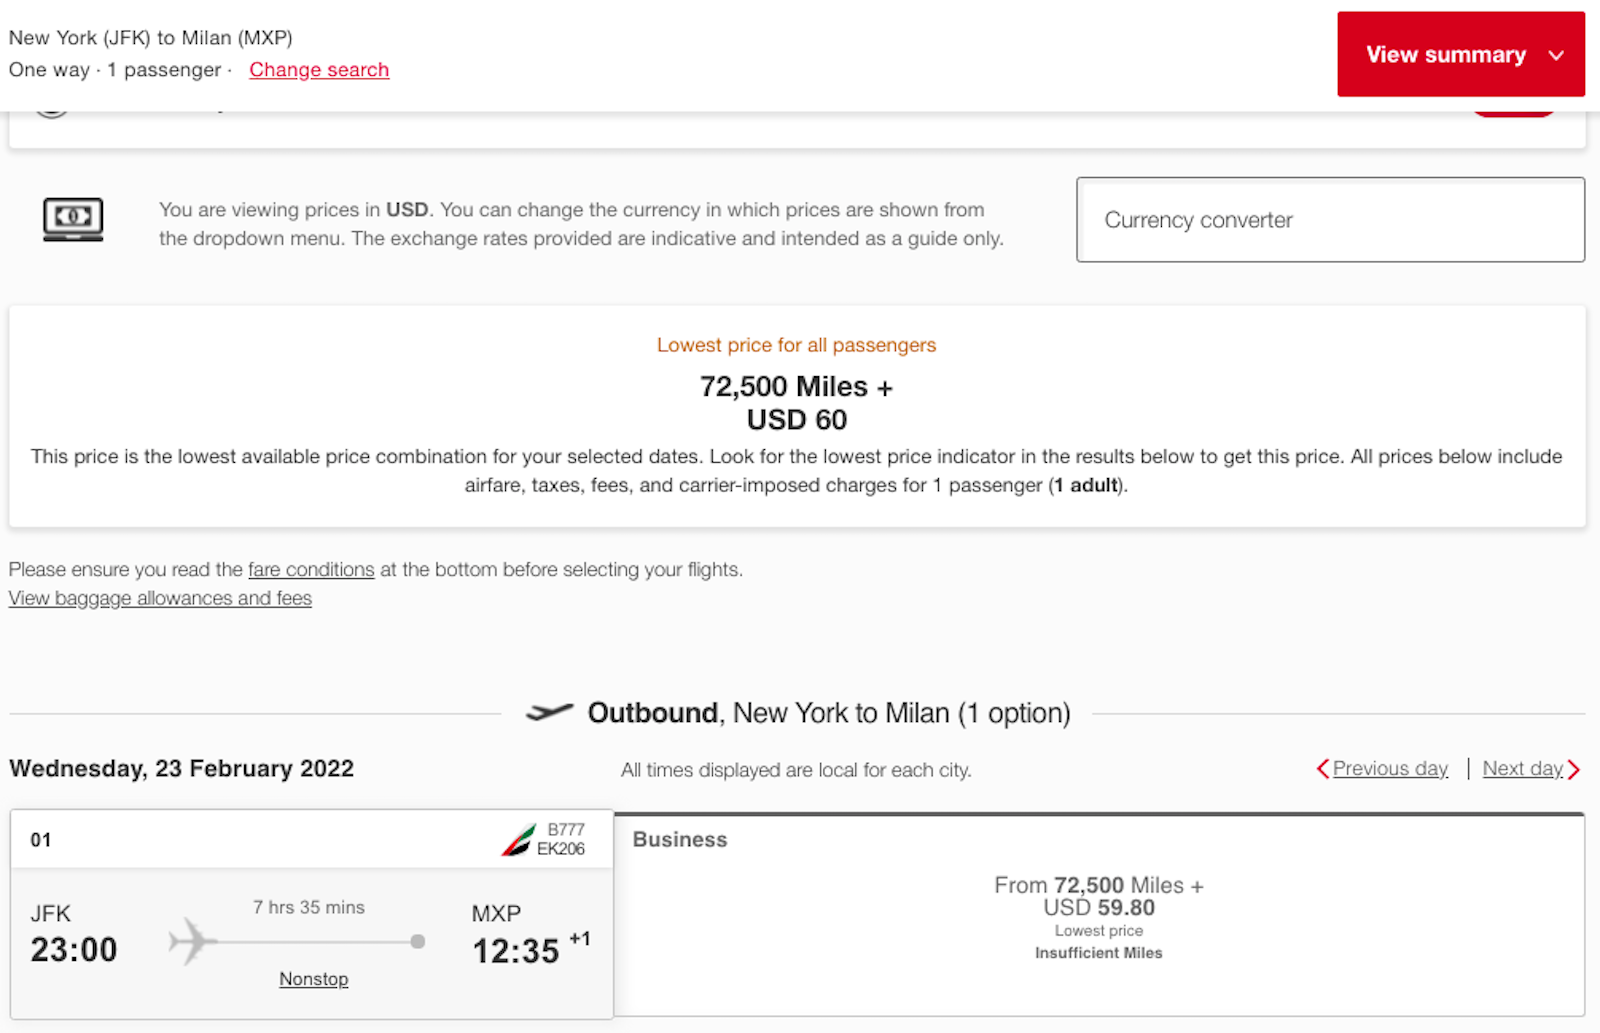 Sample Emirates award for one-way business class flight showing devaluation